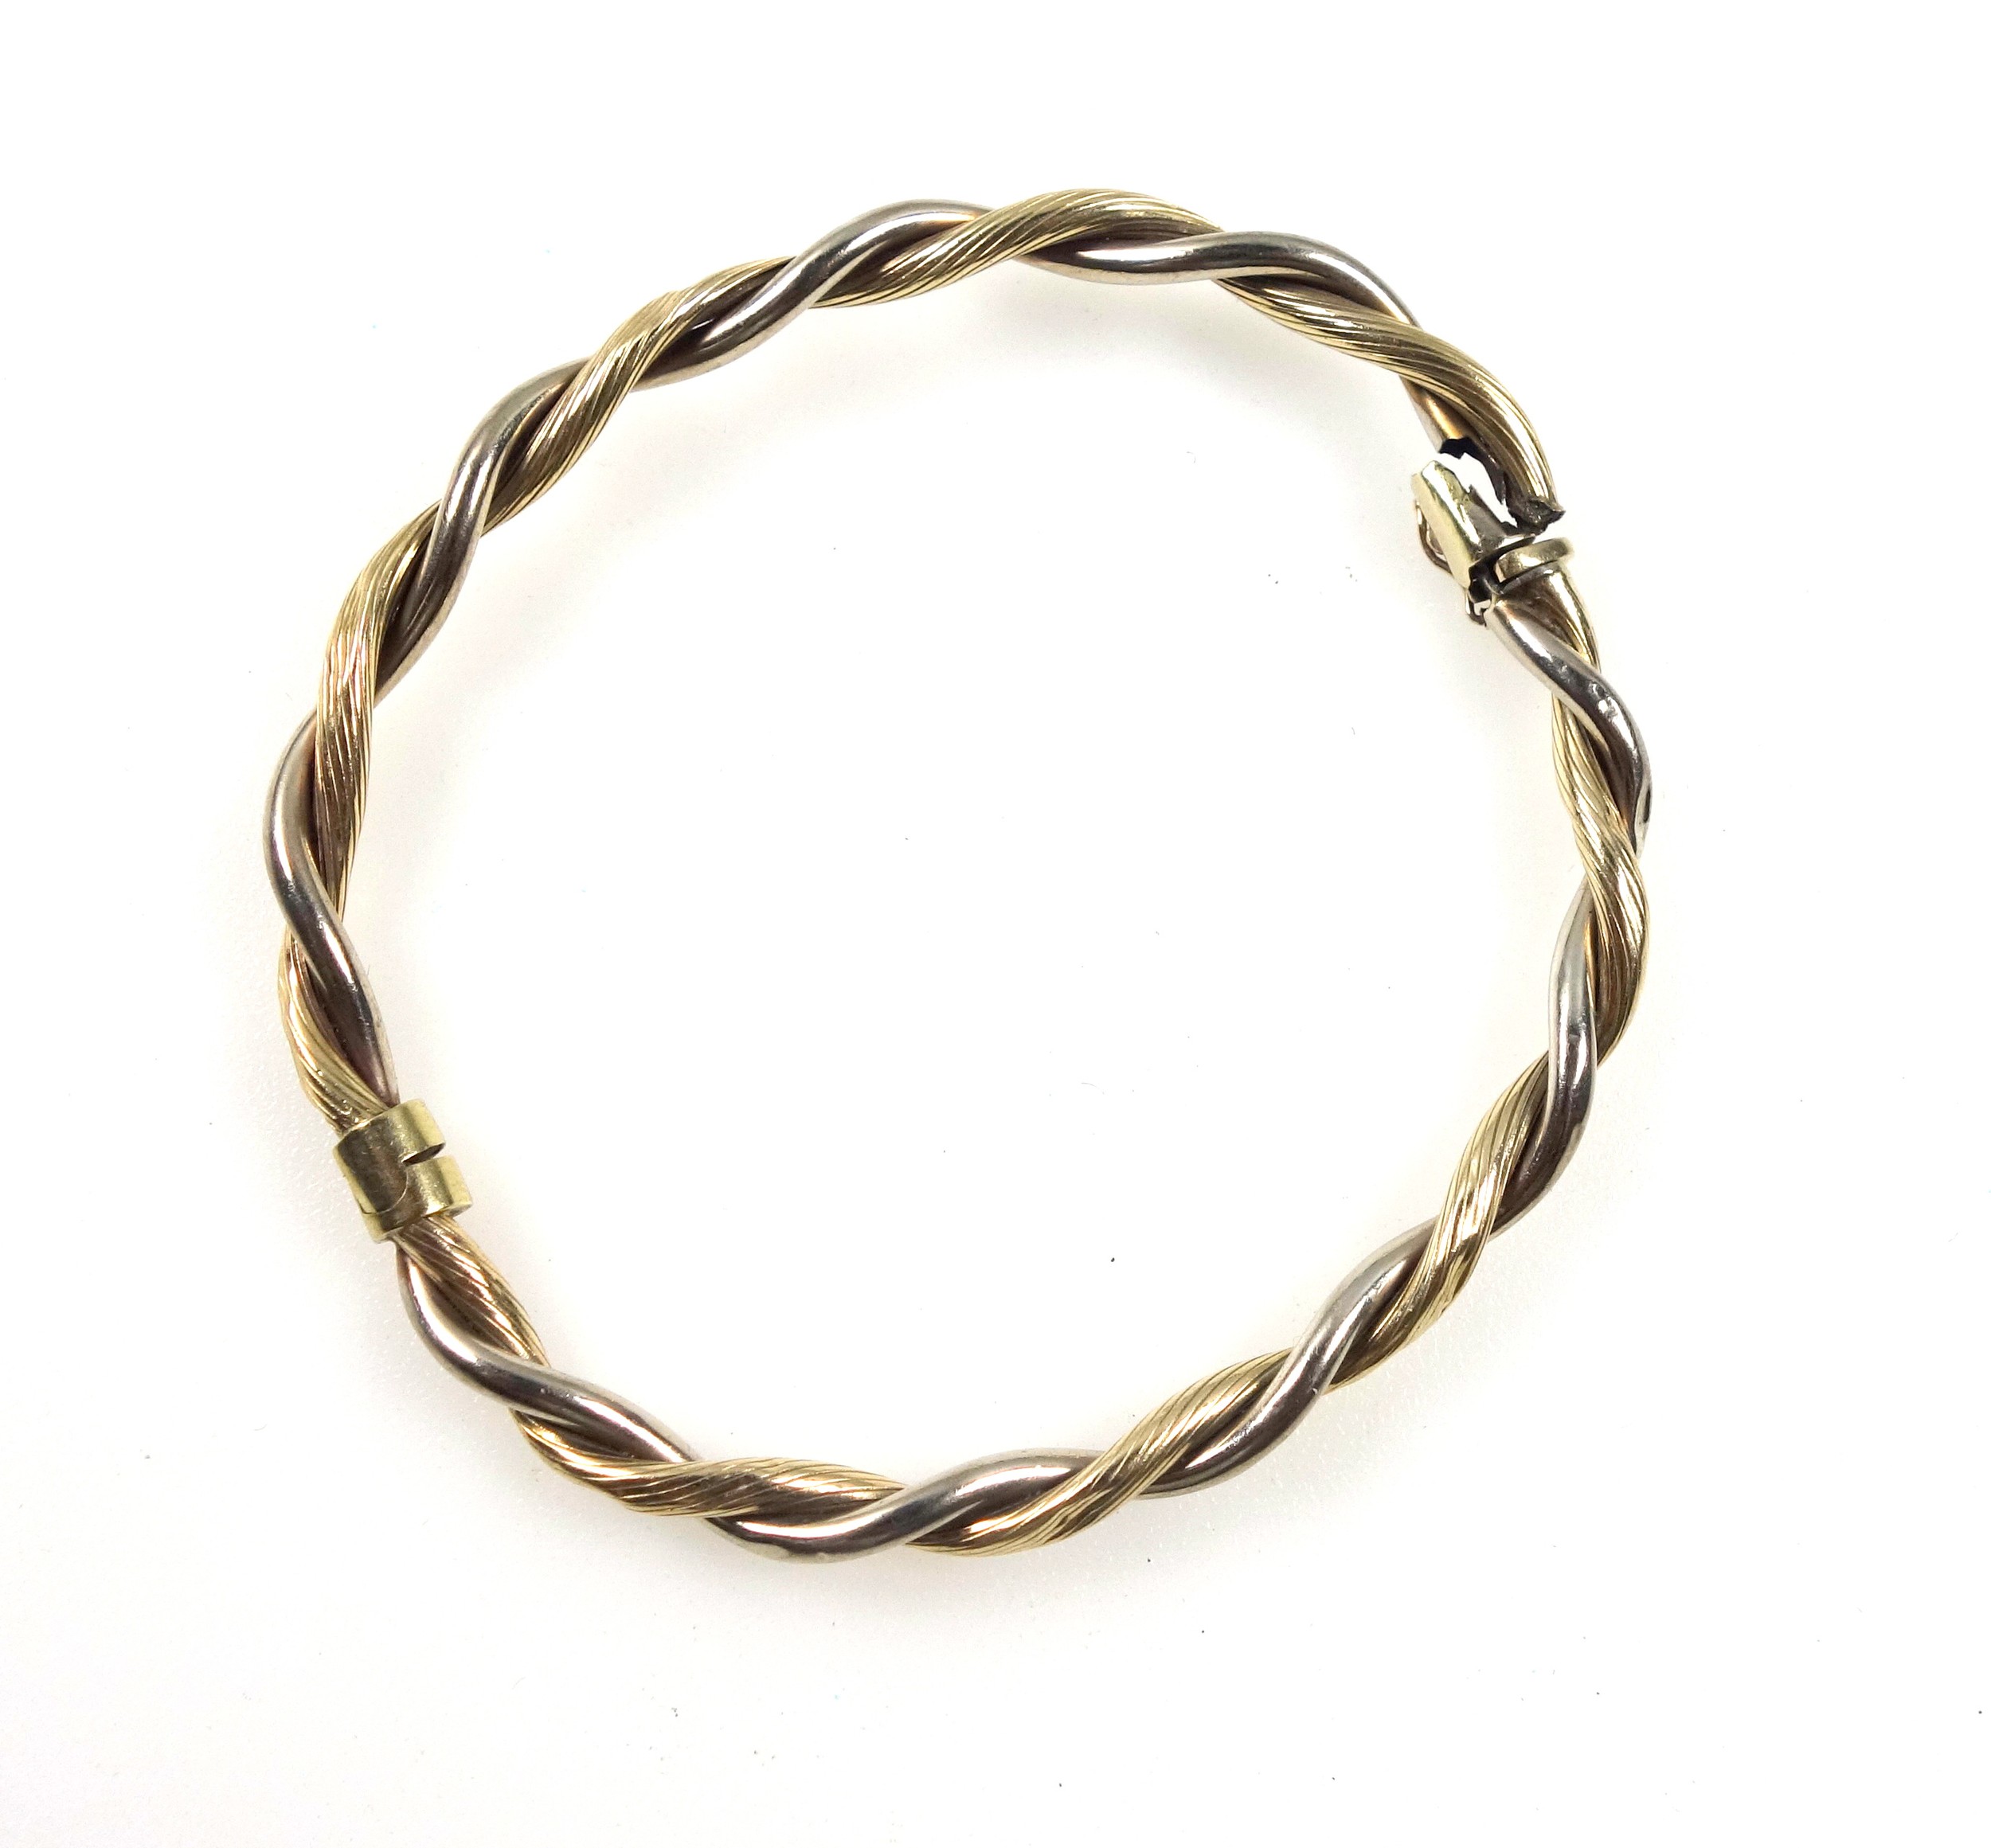 9ct 2 colour gold spiral twist hinged bracelet, convention marks, (clasp a/f), 7.4grs - Image 2 of 5